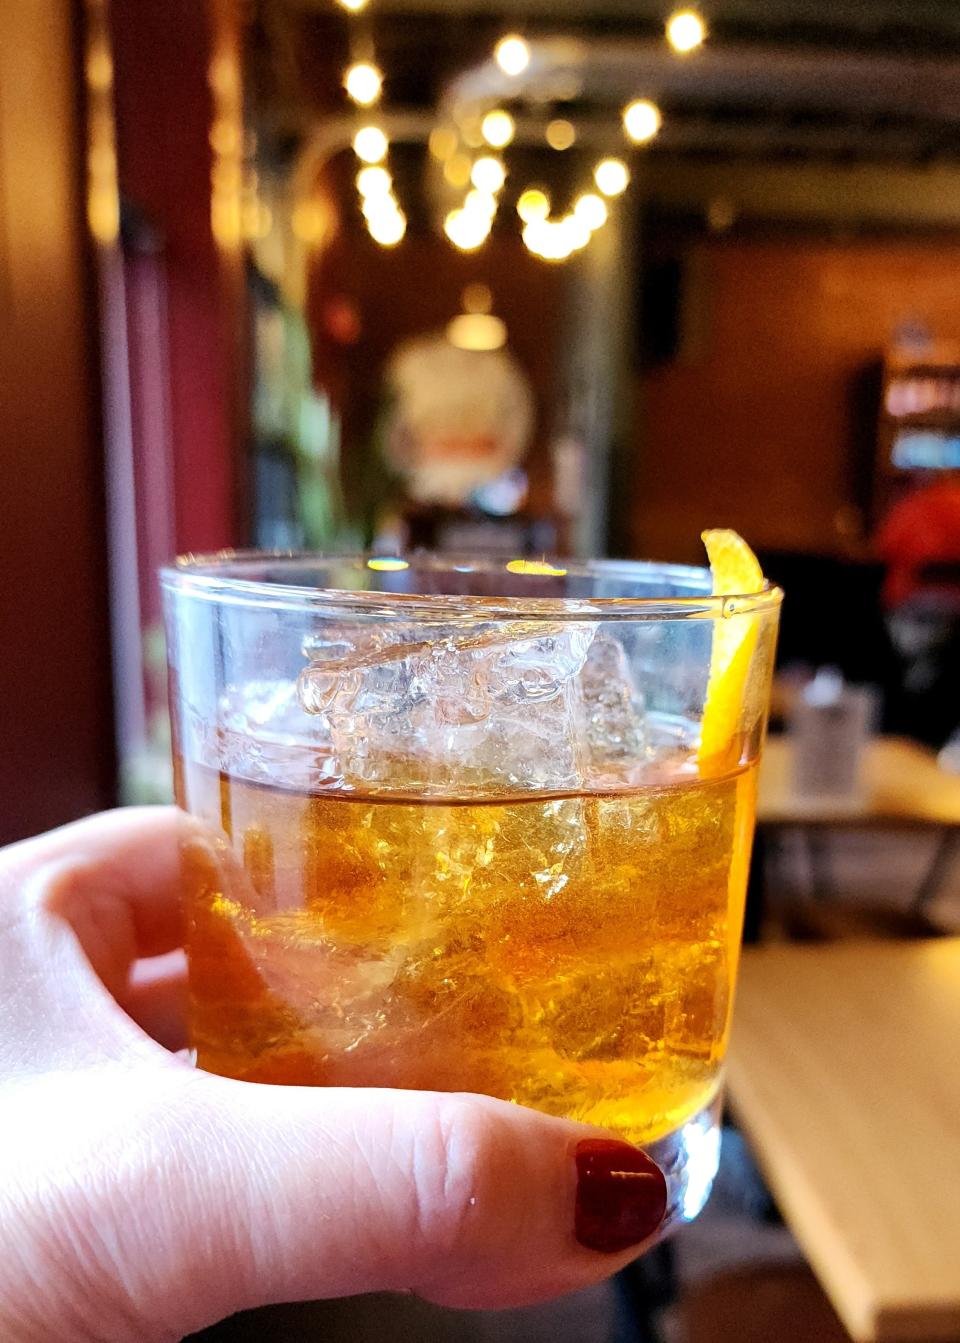 Durk's Bar-B-Q offers an Old Fashioned on Draft made with Old Overholt Bonded Rye Whiskey, smoked maple, apple bitters and smoked sea salt.